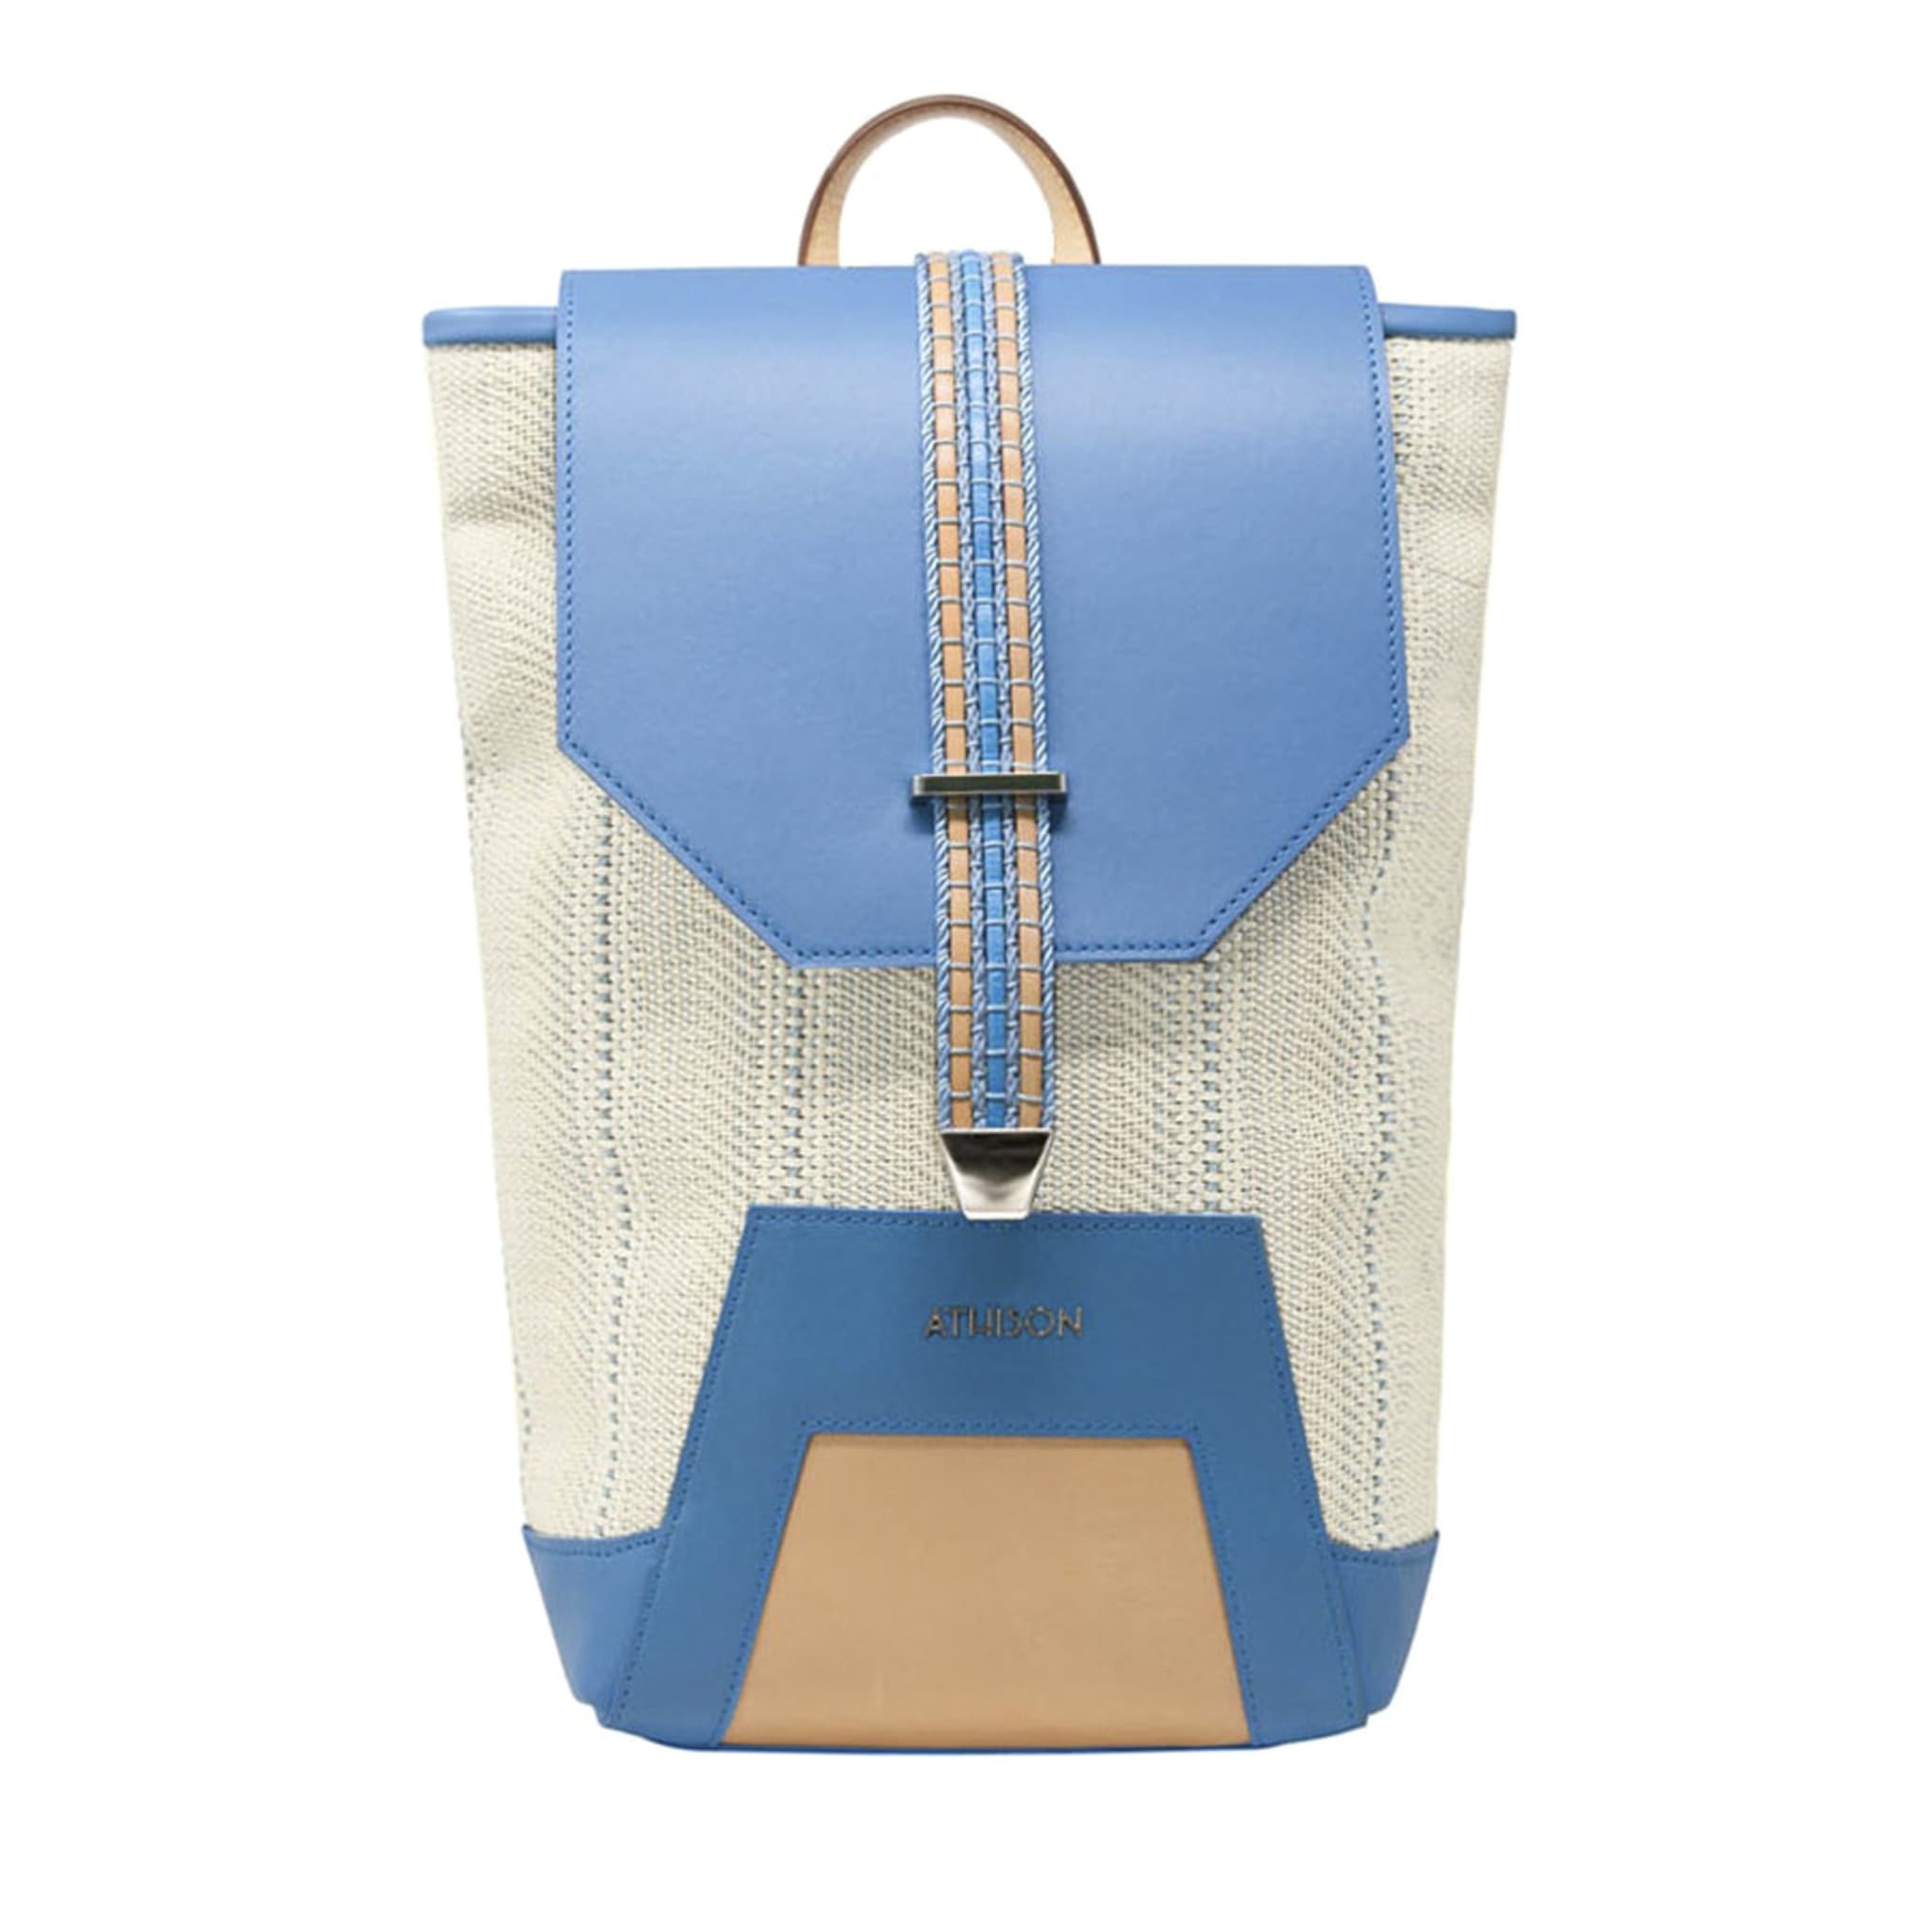 Leather and Braided Cotton Backpack “Scheggia” - Light Blue and White - Main view